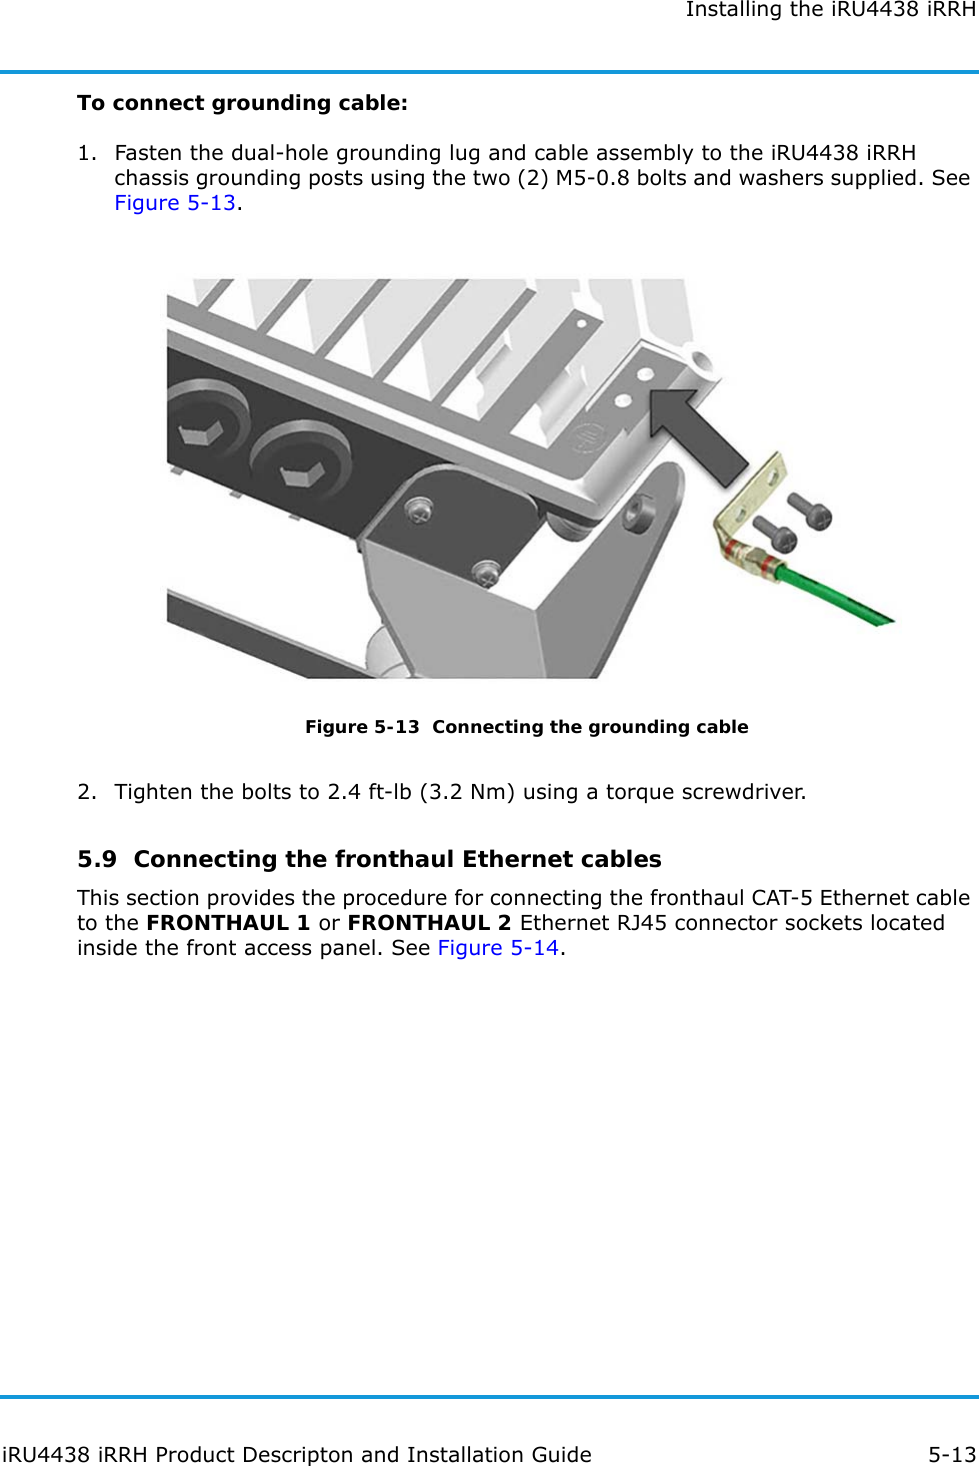 Installing the iRU4438 iRRHiRU4438 iRRH Product Descripton and Installation Guide 5-13To connect grounding cable:1. Fasten the dual-hole grounding lug and cable assembly to the iRU4438 iRRH chassis grounding posts using the two (2) M5-0.8 bolts and washers supplied. See Figure 5-13.Figure 5-13  Connecting the grounding cable2. Tighten the bolts to 2.4 ft-lb (3.2 Nm) using a torque screwdriver.5.9  Connecting the fronthaul Ethernet cablesThis section provides the procedure for connecting the fronthaul CAT-5 Ethernet cable to the FRONTHAUL 1 or FRONTHAUL 2 Ethernet RJ45 connector sockets located inside the front access panel. See Figure 5-14.